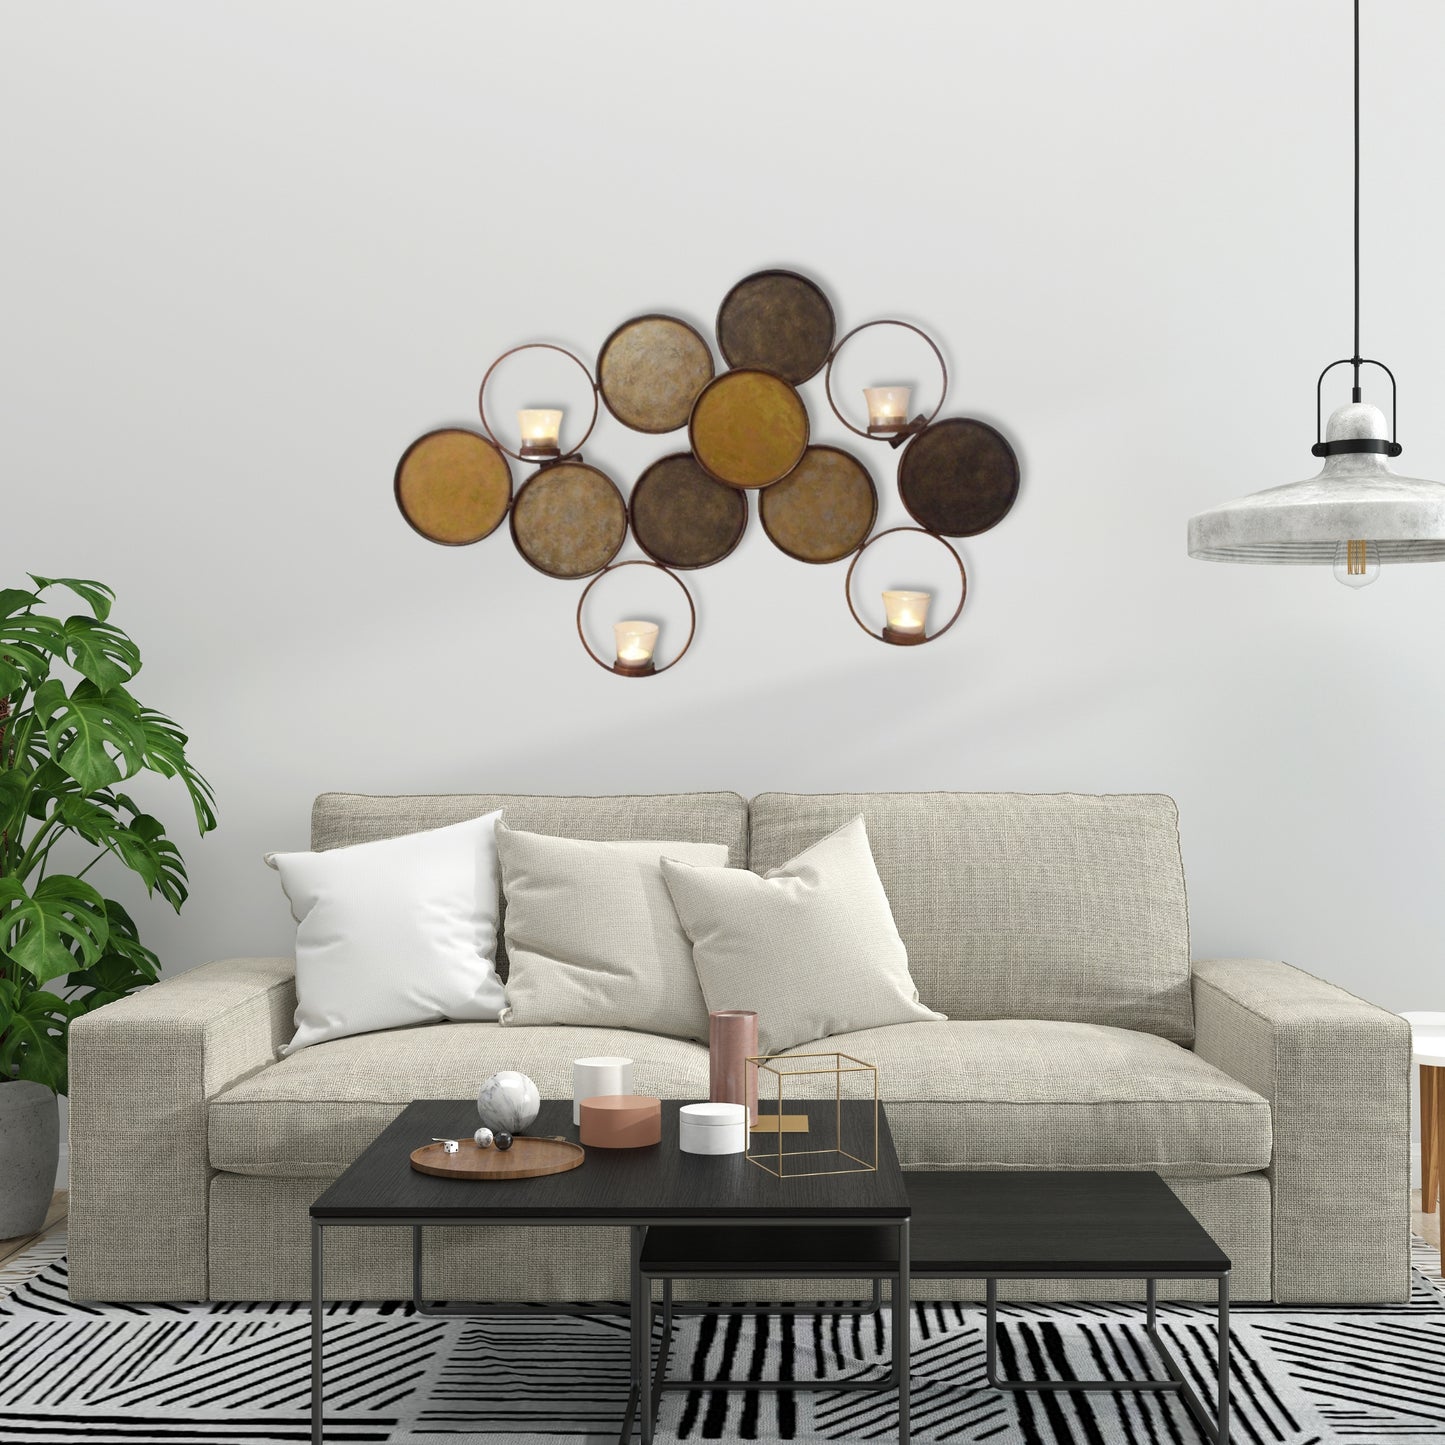 Gold Circle Wall Decor - Four Votive Candle Holder Wall Accent (31"W) shown as living room wall decor over a comfy sofa | InsideOutCatalog.com